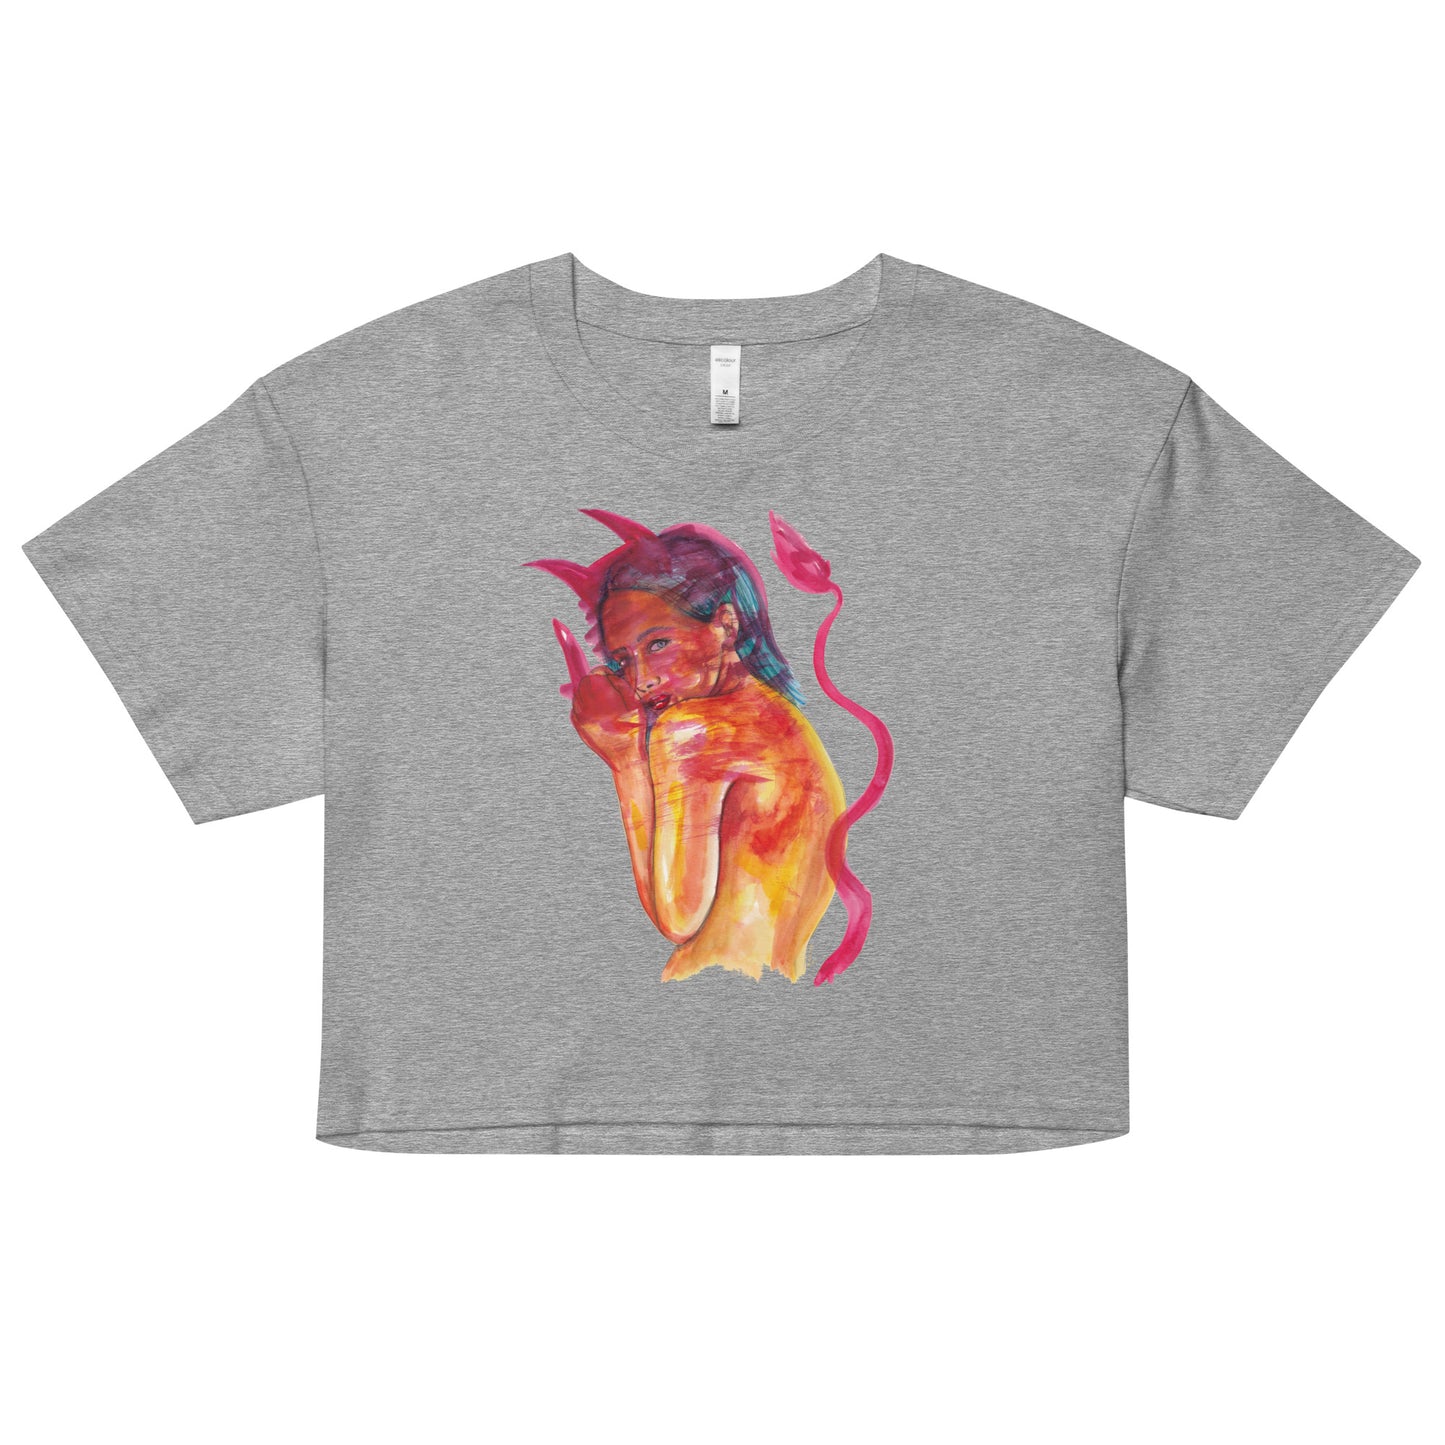 " Lady In Red " Women’s crop top